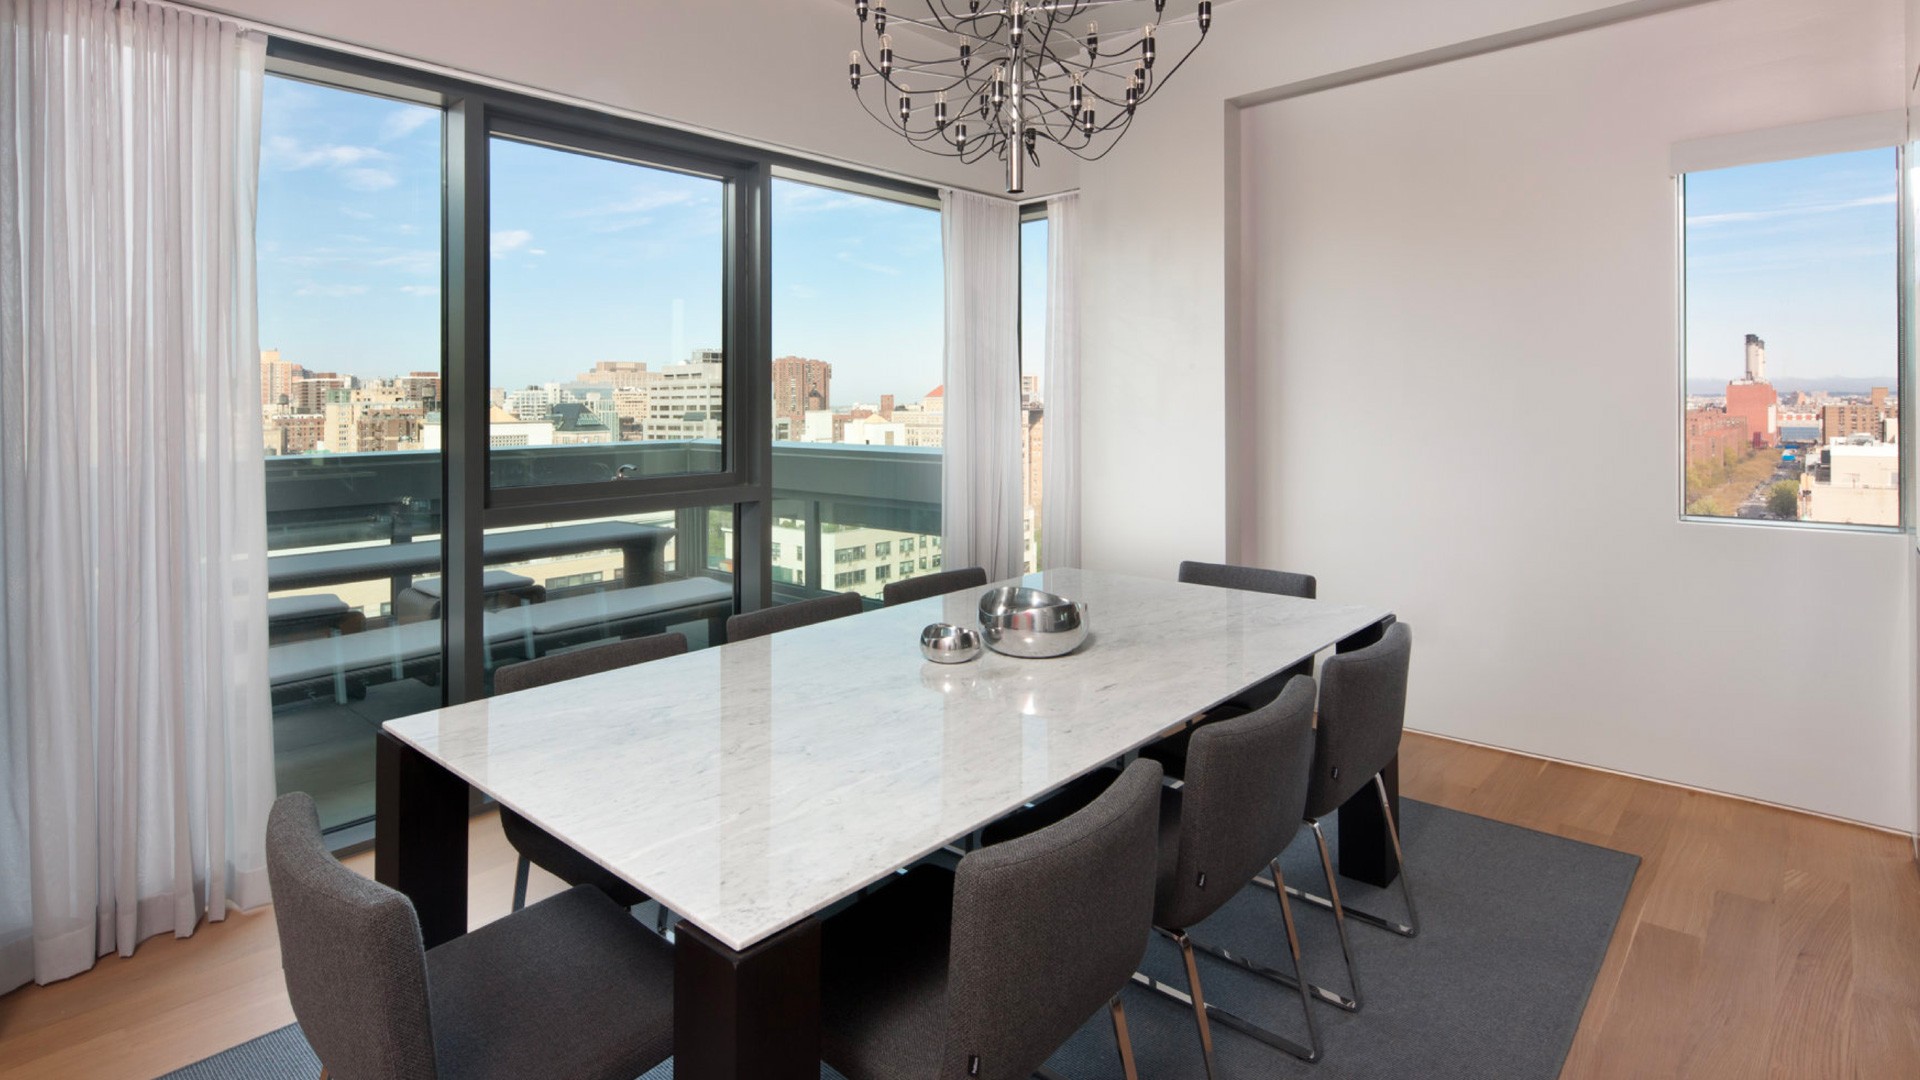 Poliform_contract_residential_123_THIRD_AVENUE_06_1920x1080px_gallery